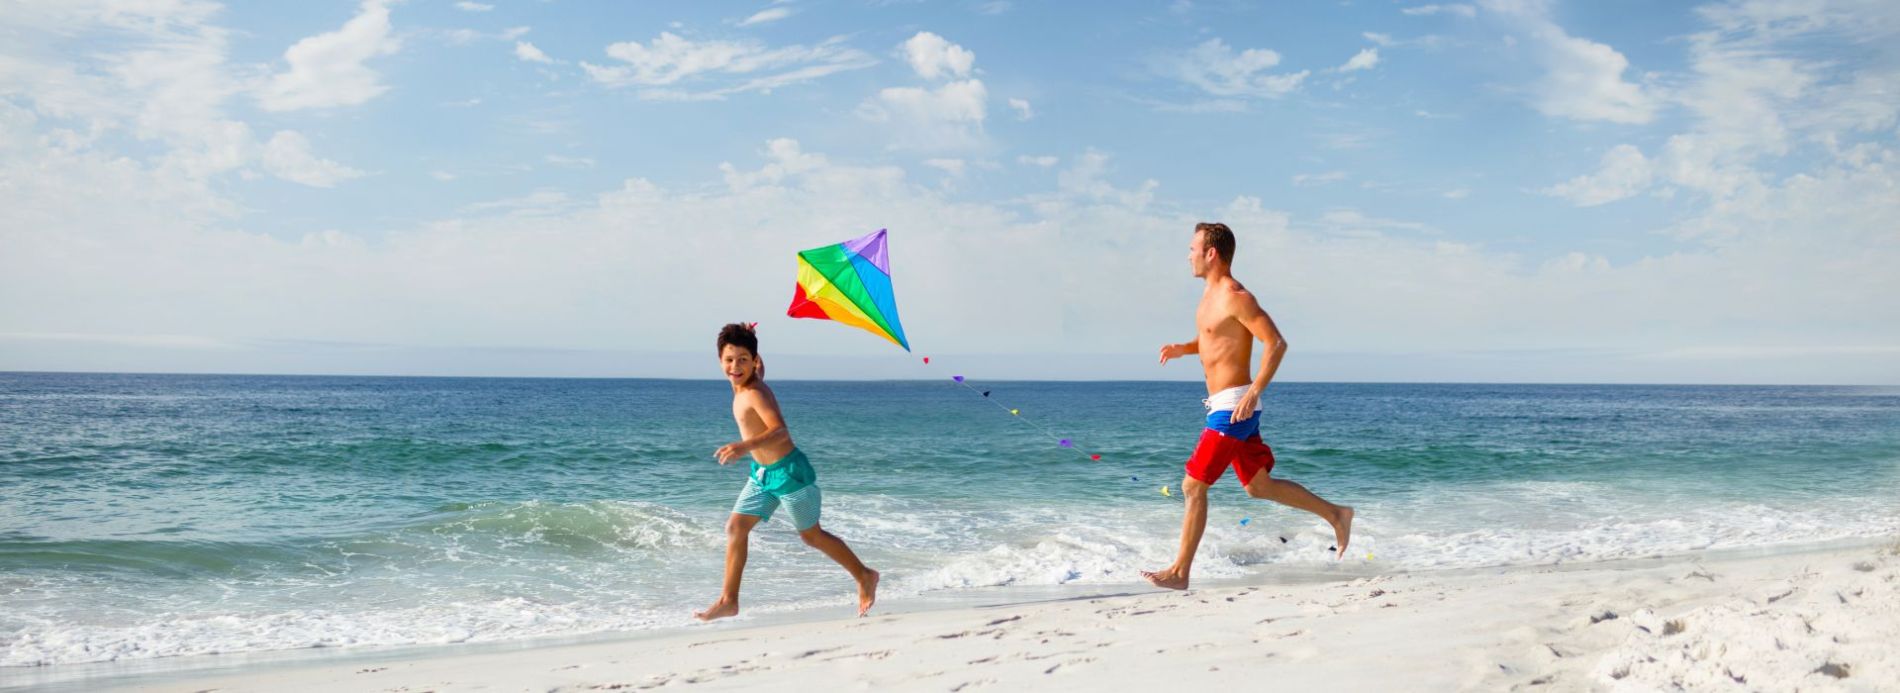 father and son fly kite on beach